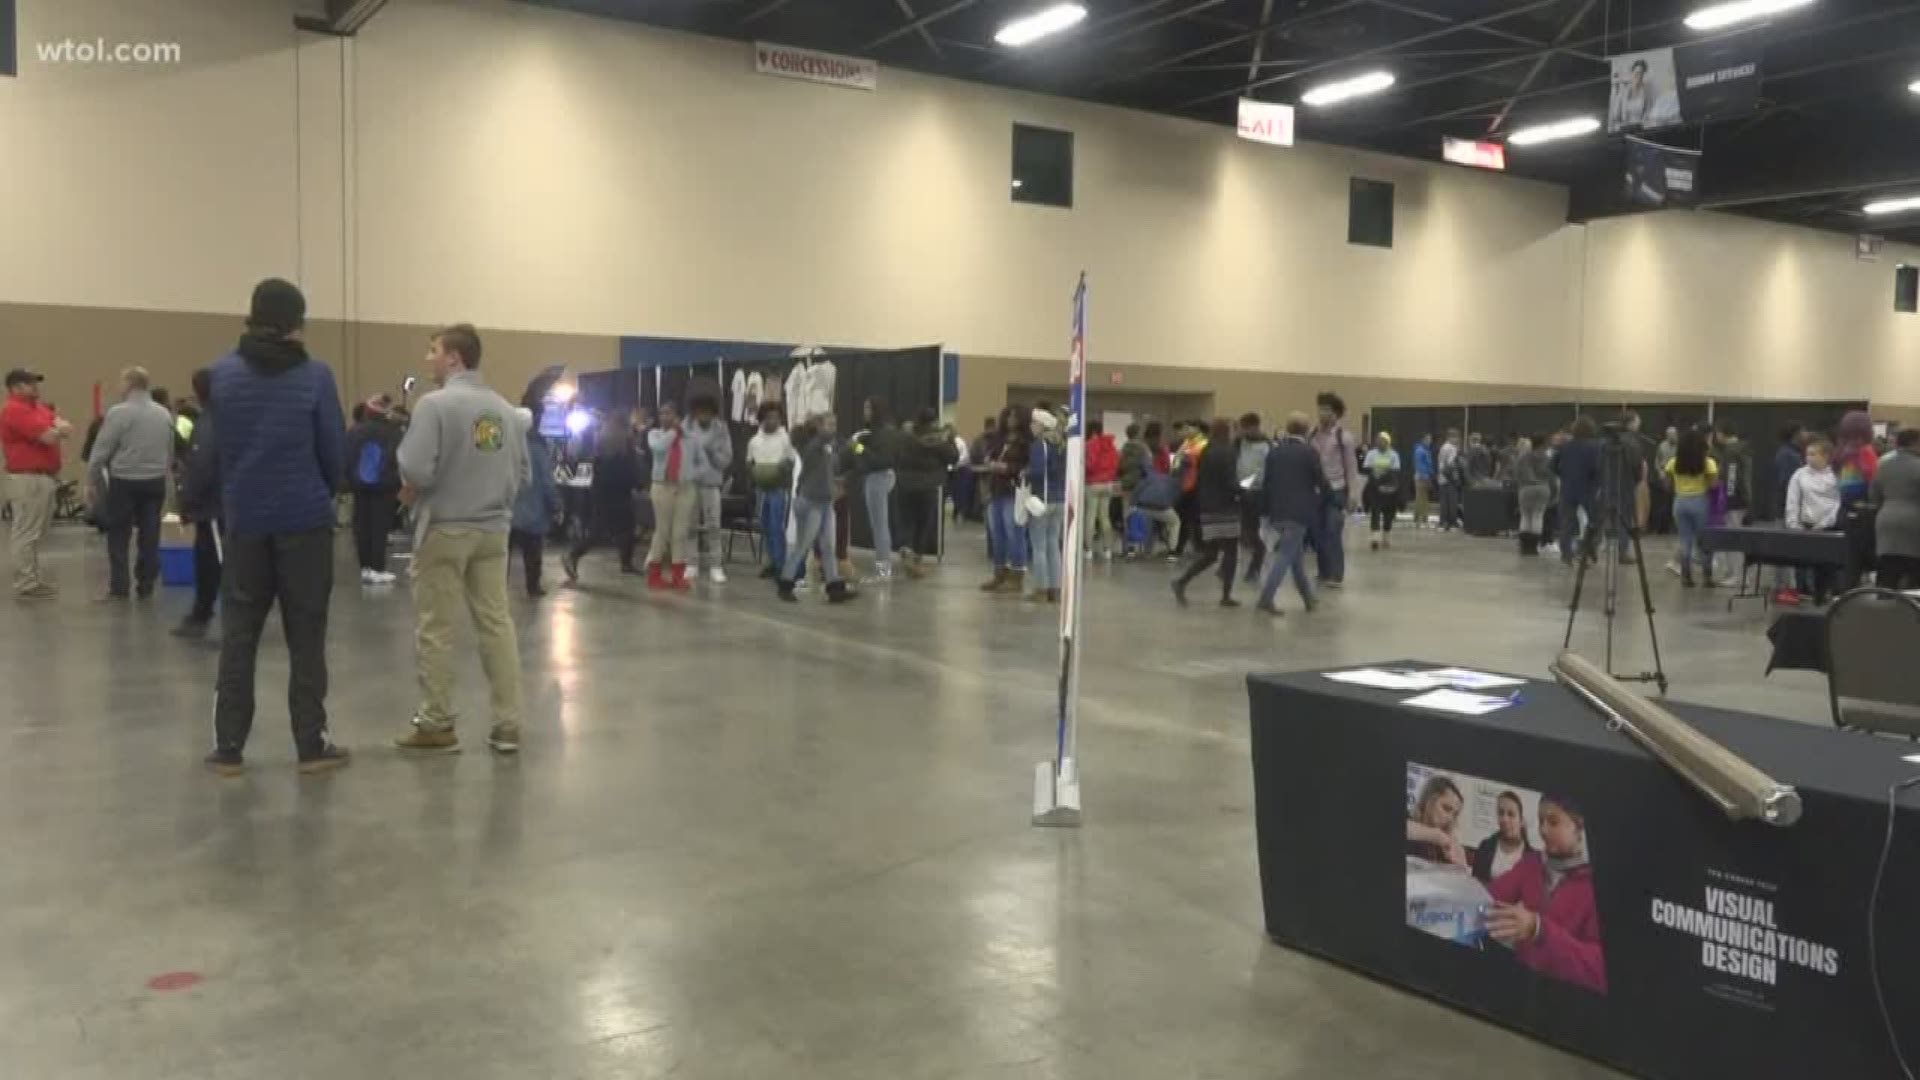 Having to choose a career in middle and high school is not easy for everyone. That's why Toledo Public Schools is holding its career expo.